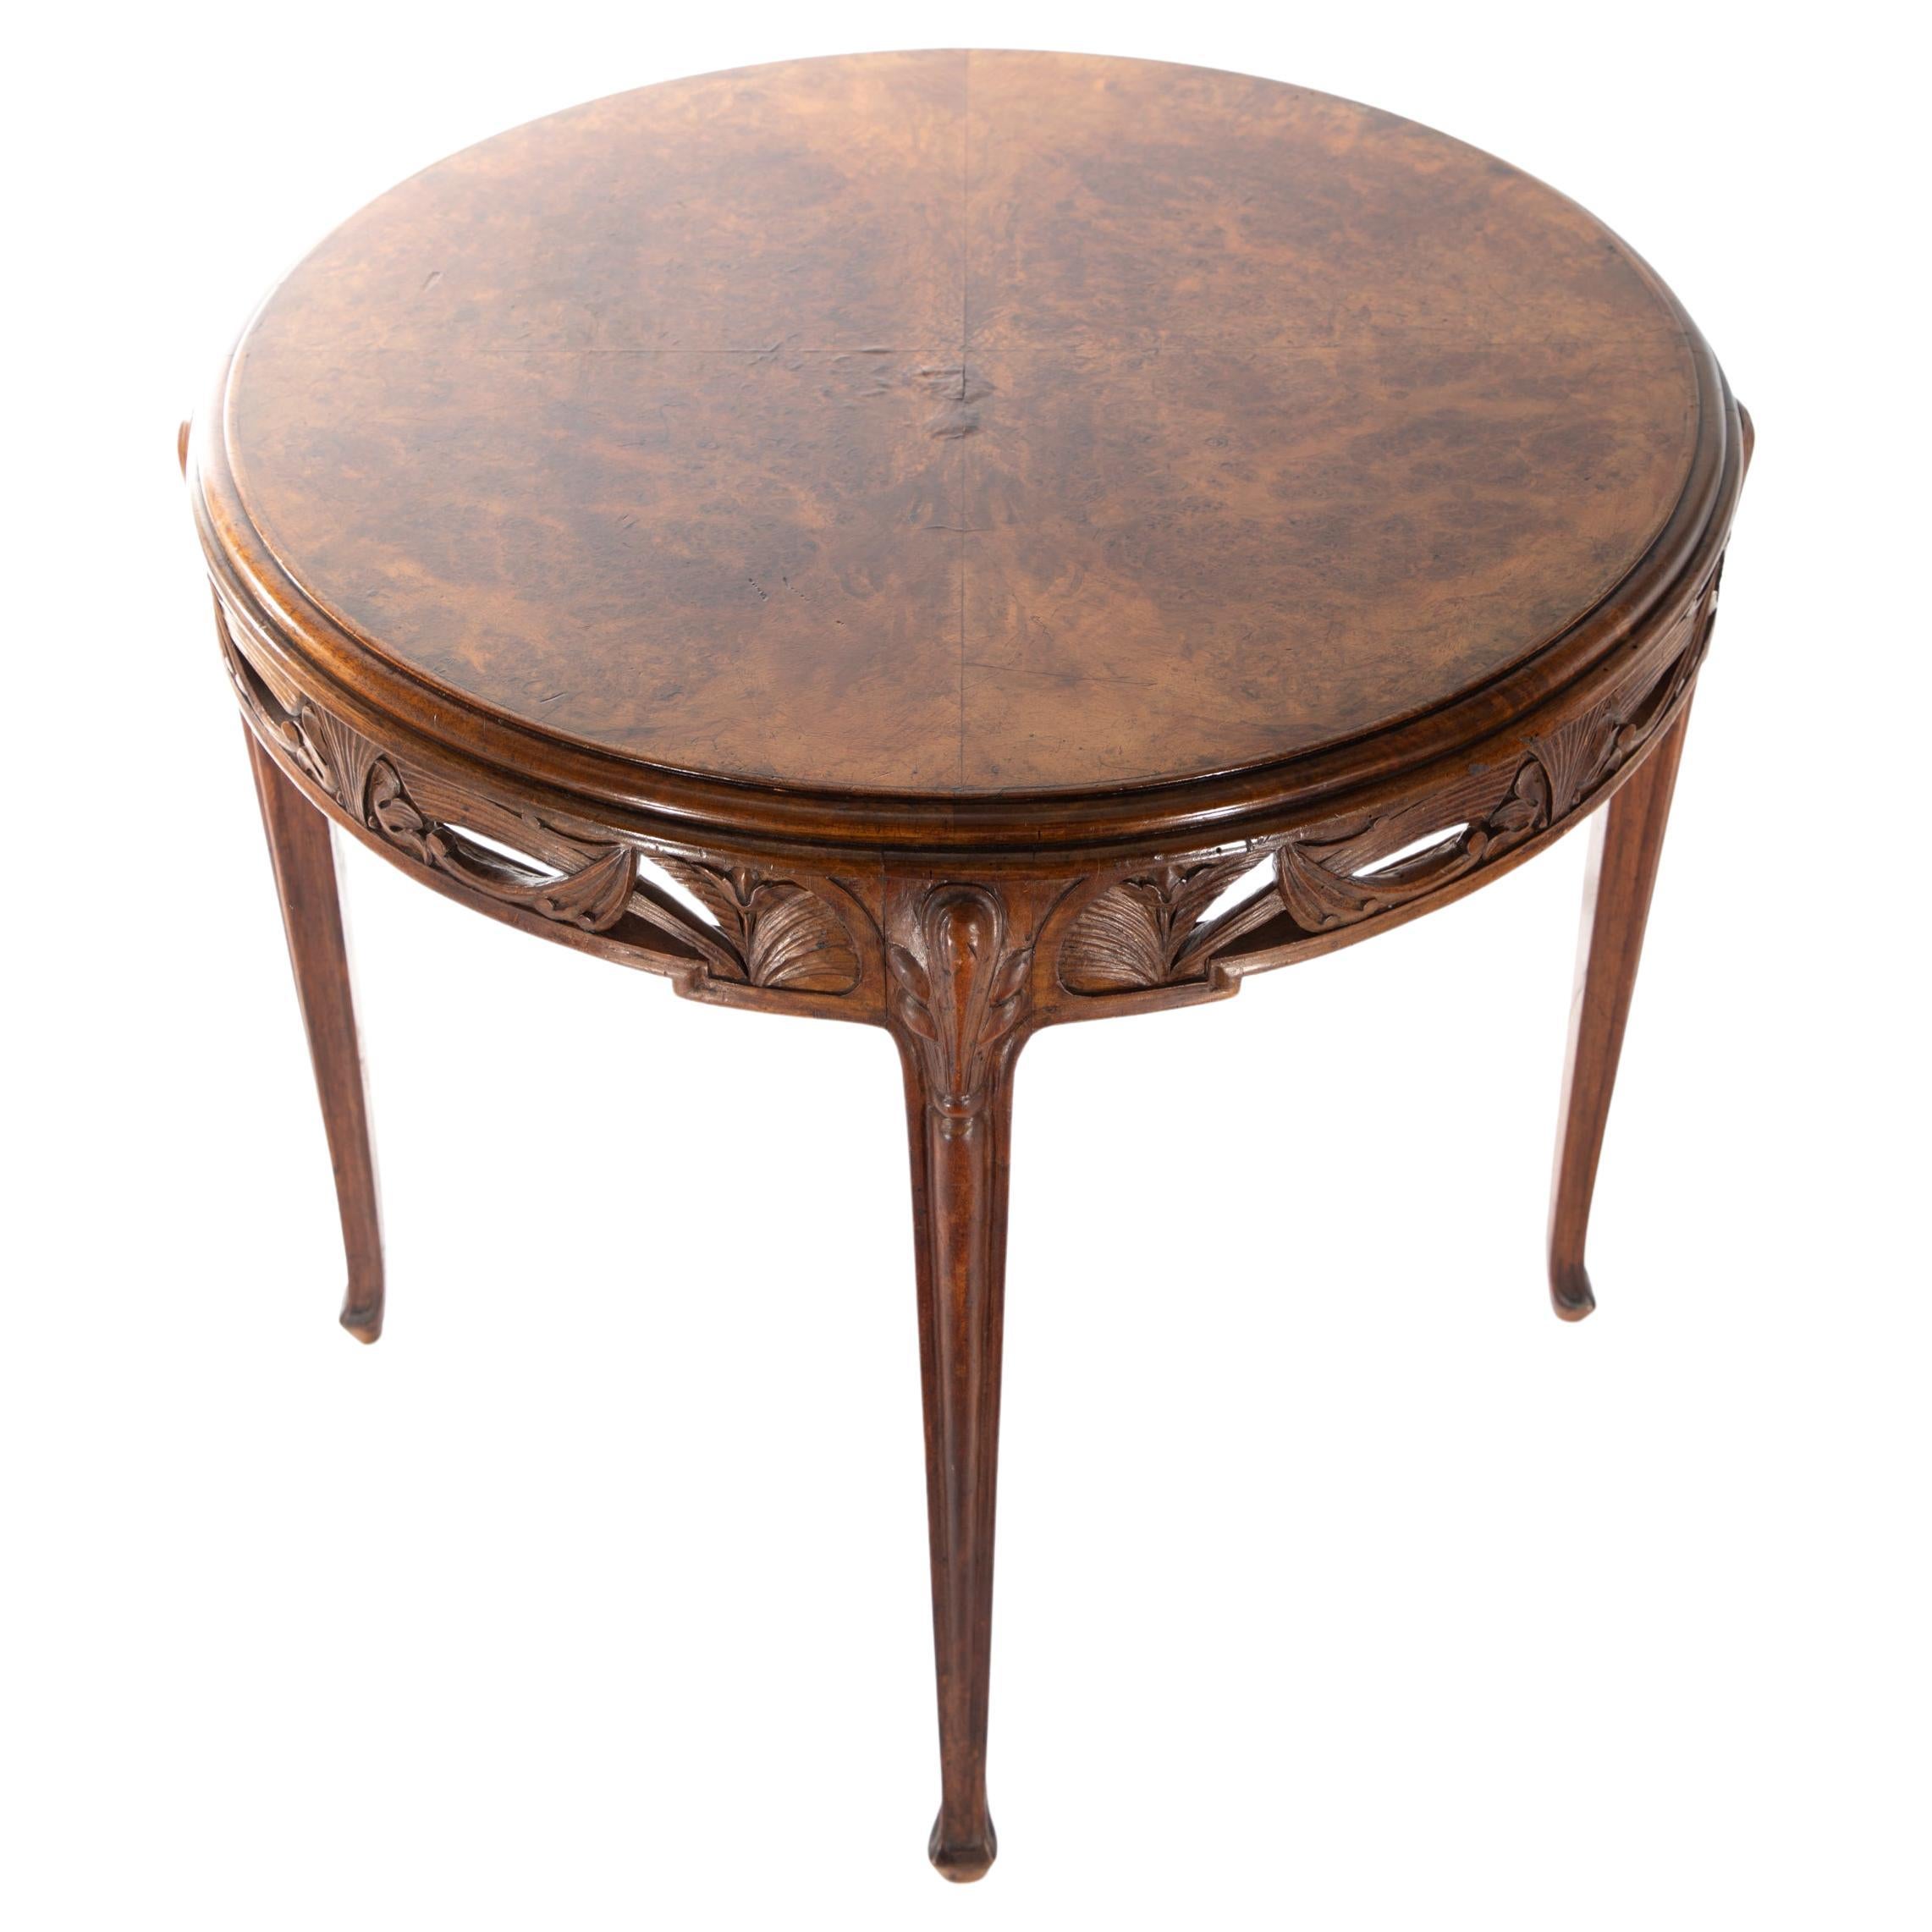 Large Round Art Deco Style Table